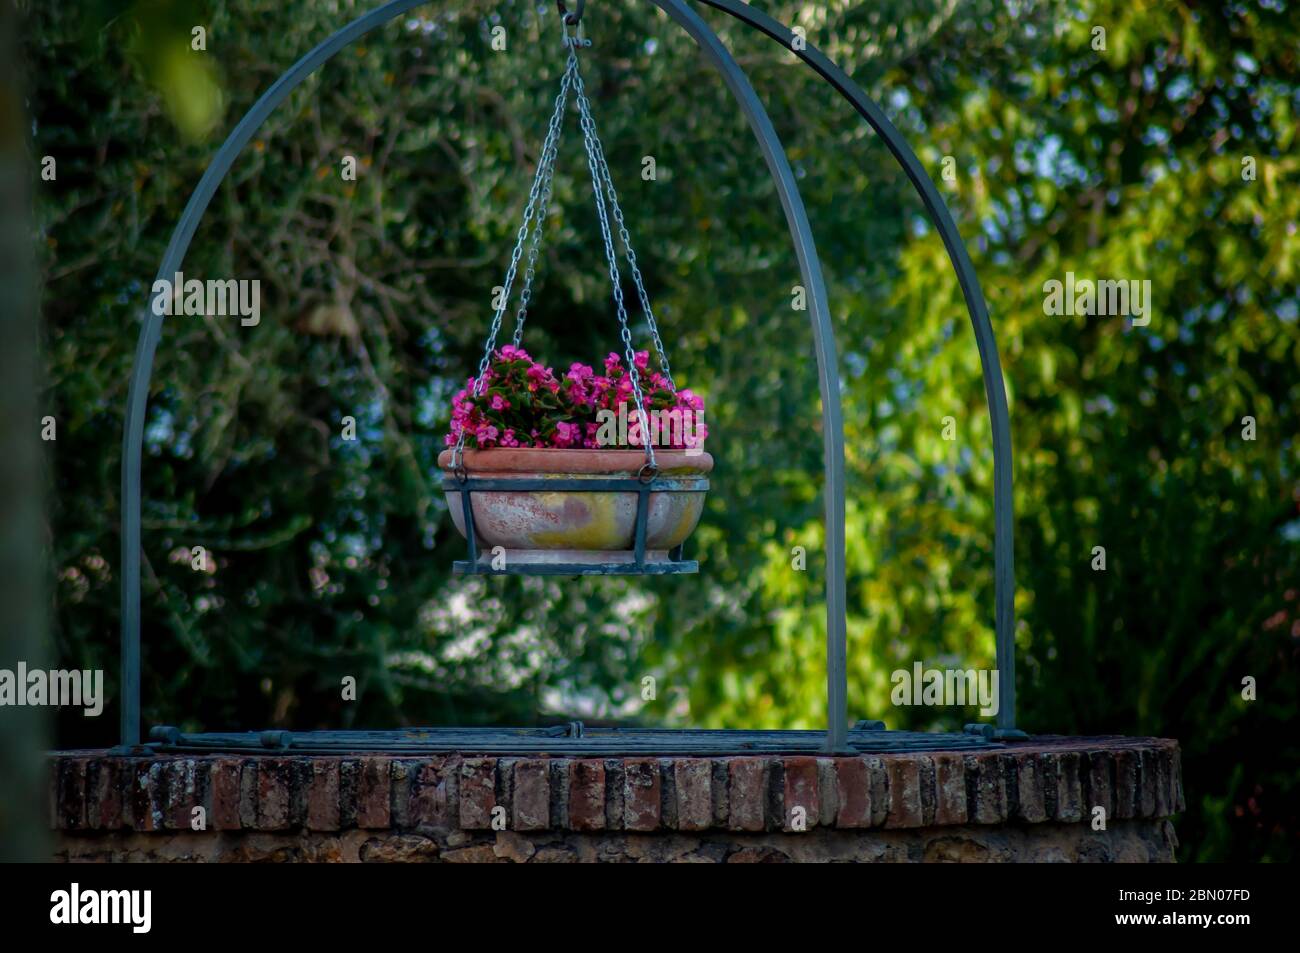 A hanging basket of pink flowers hangs on a metal frame over a brick entrance to a well with sunlit trees in the blurred background Stock Photo